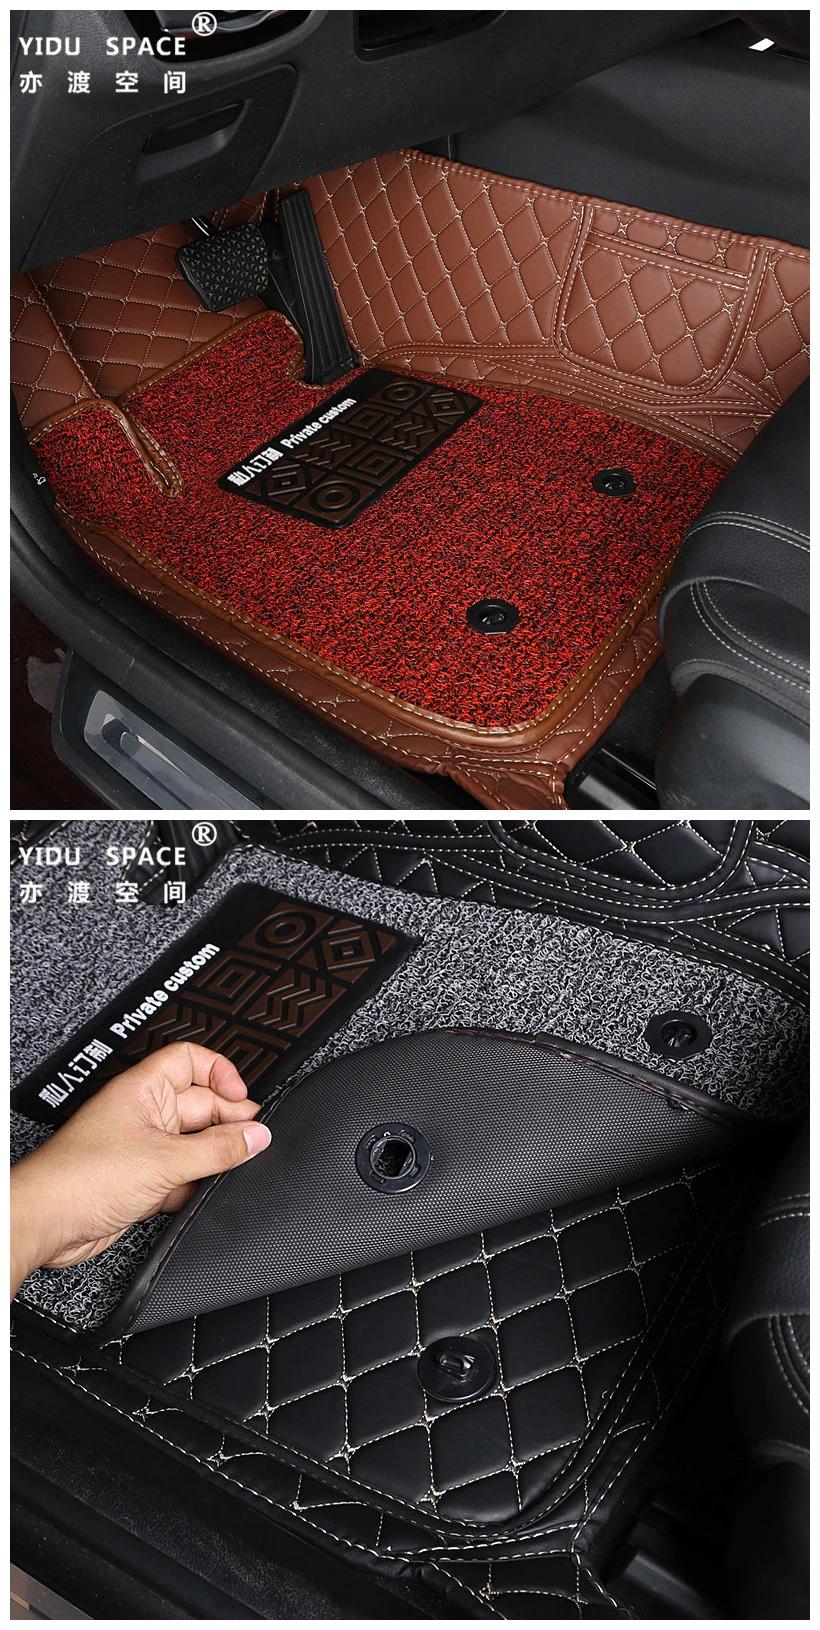 Hand Sewing Leather Coil 5D Anti Slip Car Foot Mats